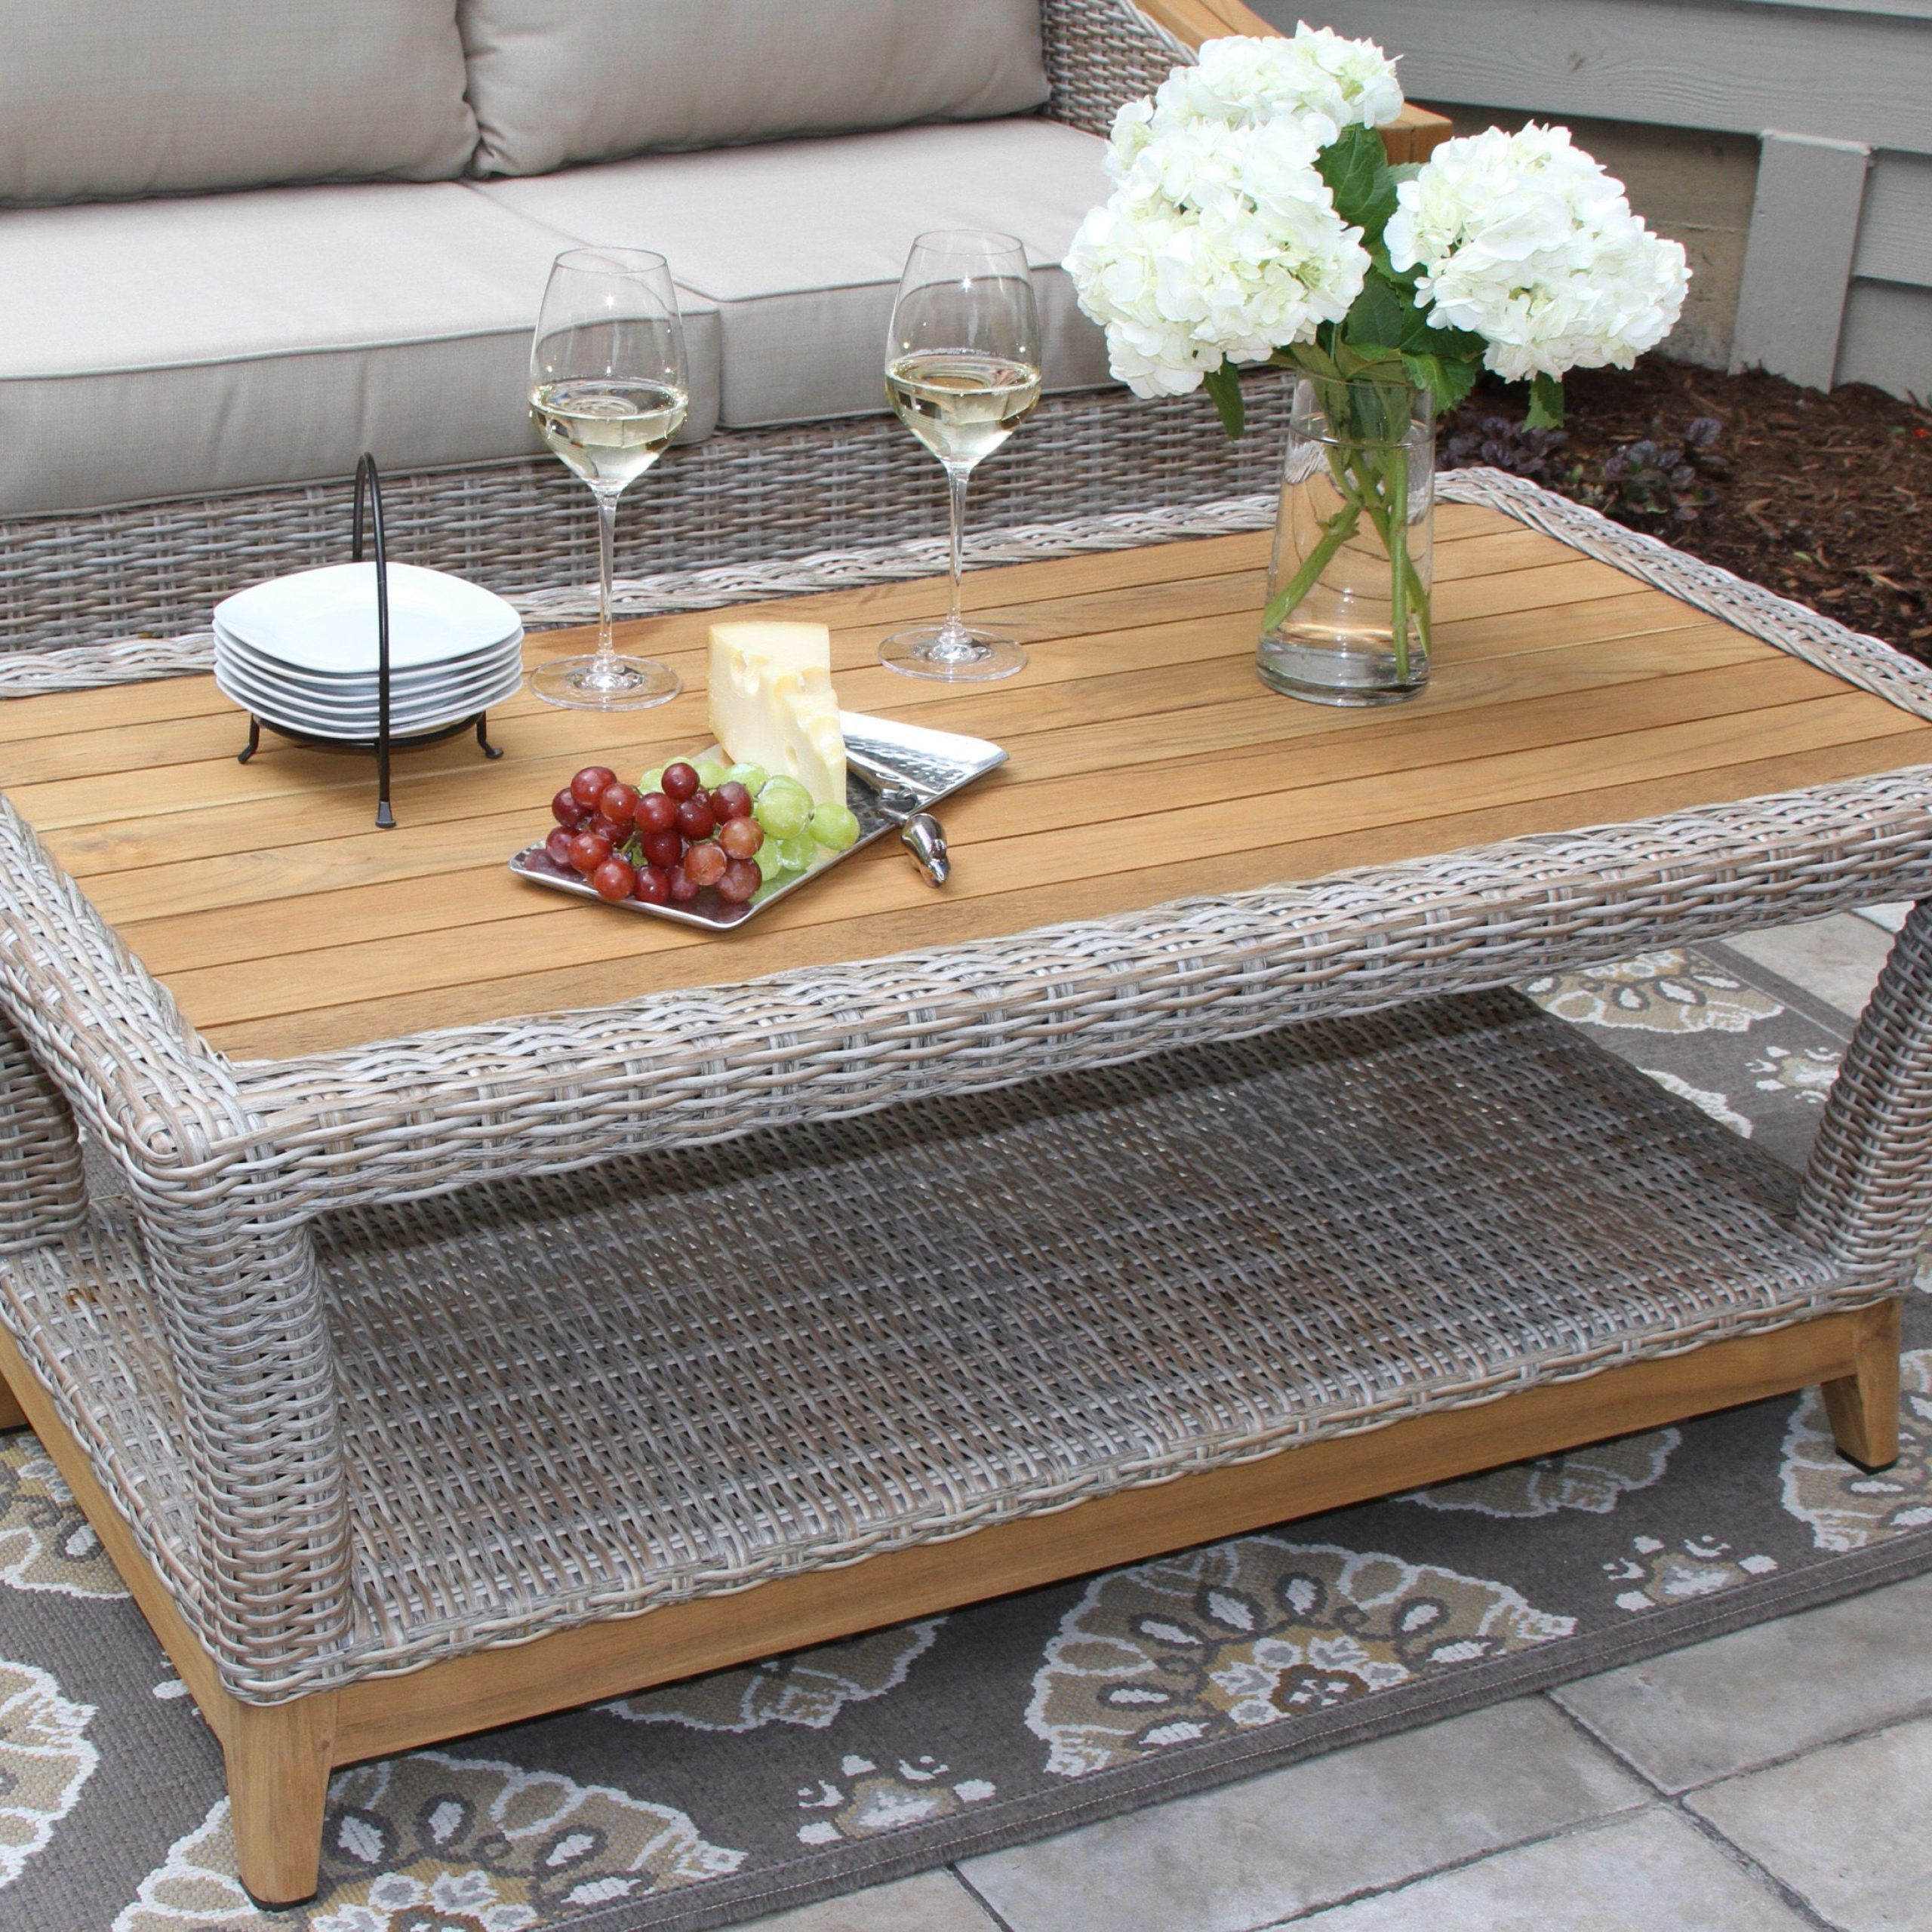 Most Recent Modern Outdoor Patio Coffee Tables Throughout How To Decorate An Outdoor Coffee Table – Coffee Table Decor (View 10 of 15)